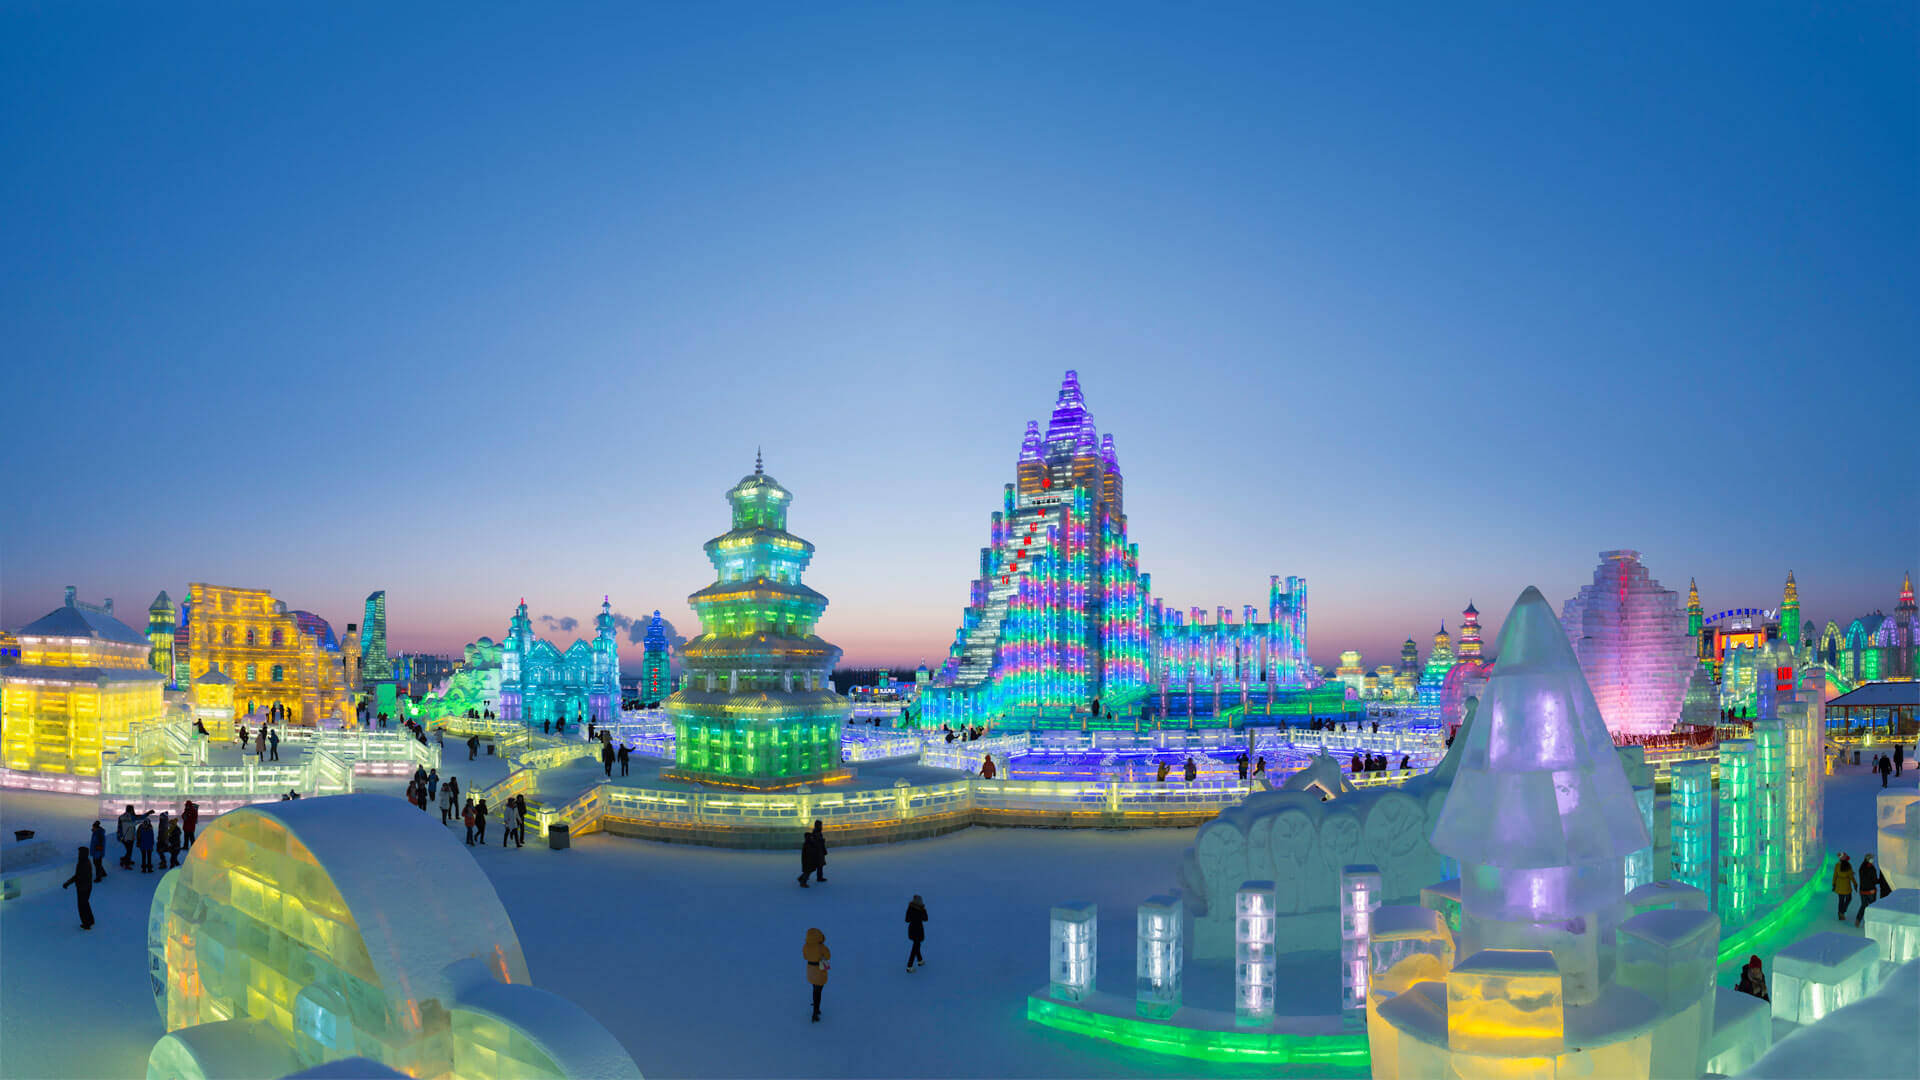 Breathtaking view of the vibrant ice structures at the Harbin Ice Festival Wallpaper